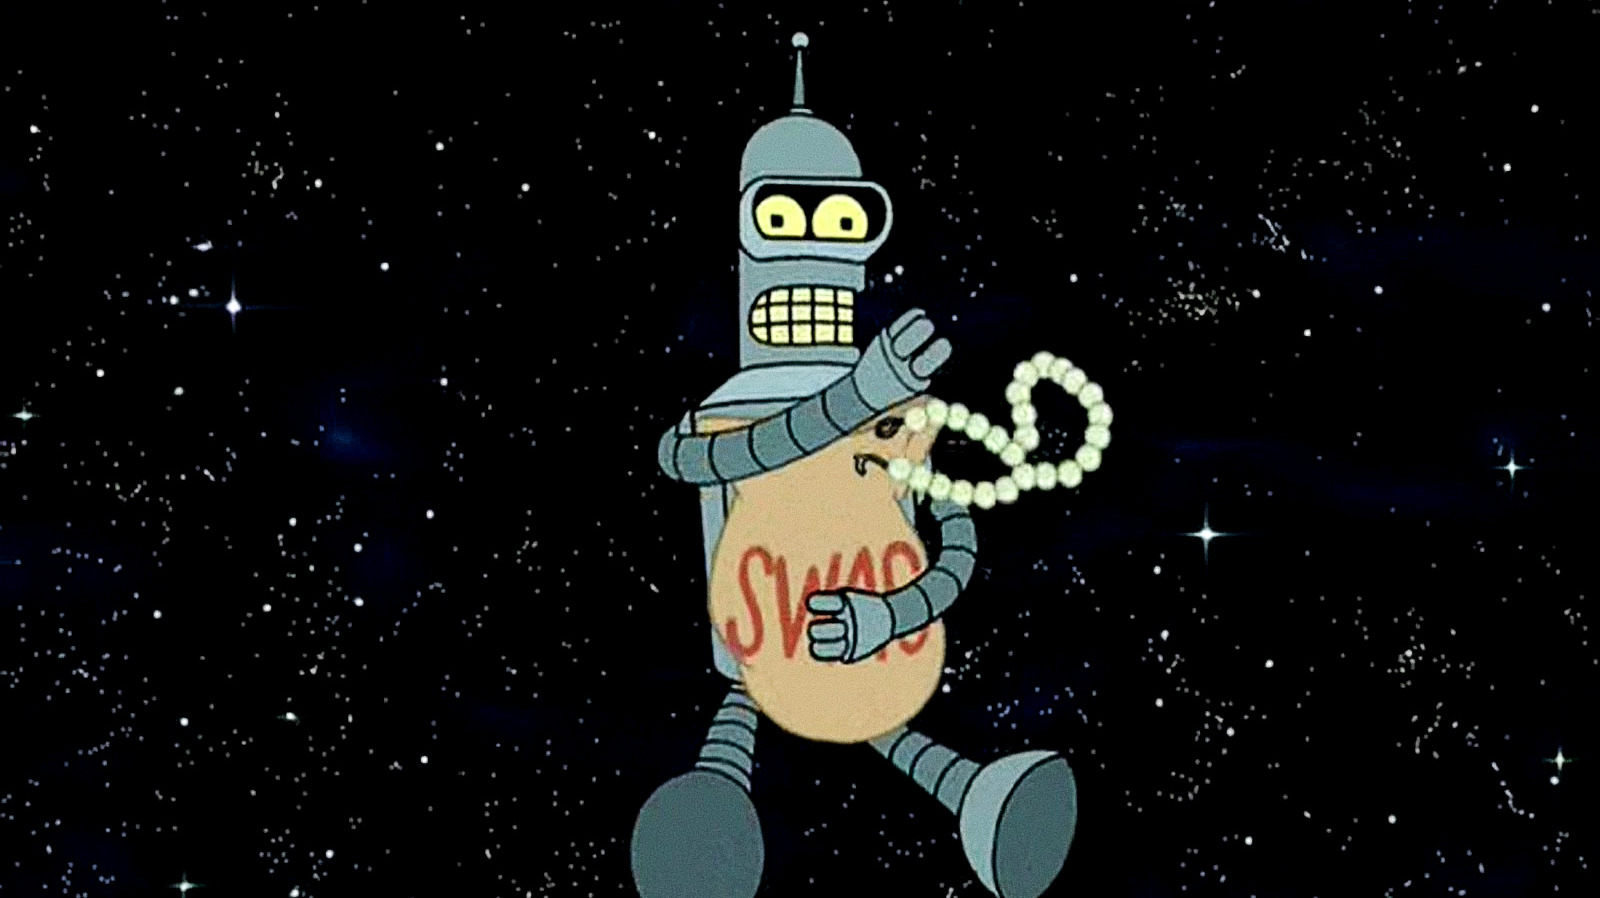 Futurama Combined Two Classic Star Trek Plots For One Of Bender's Best Episodes